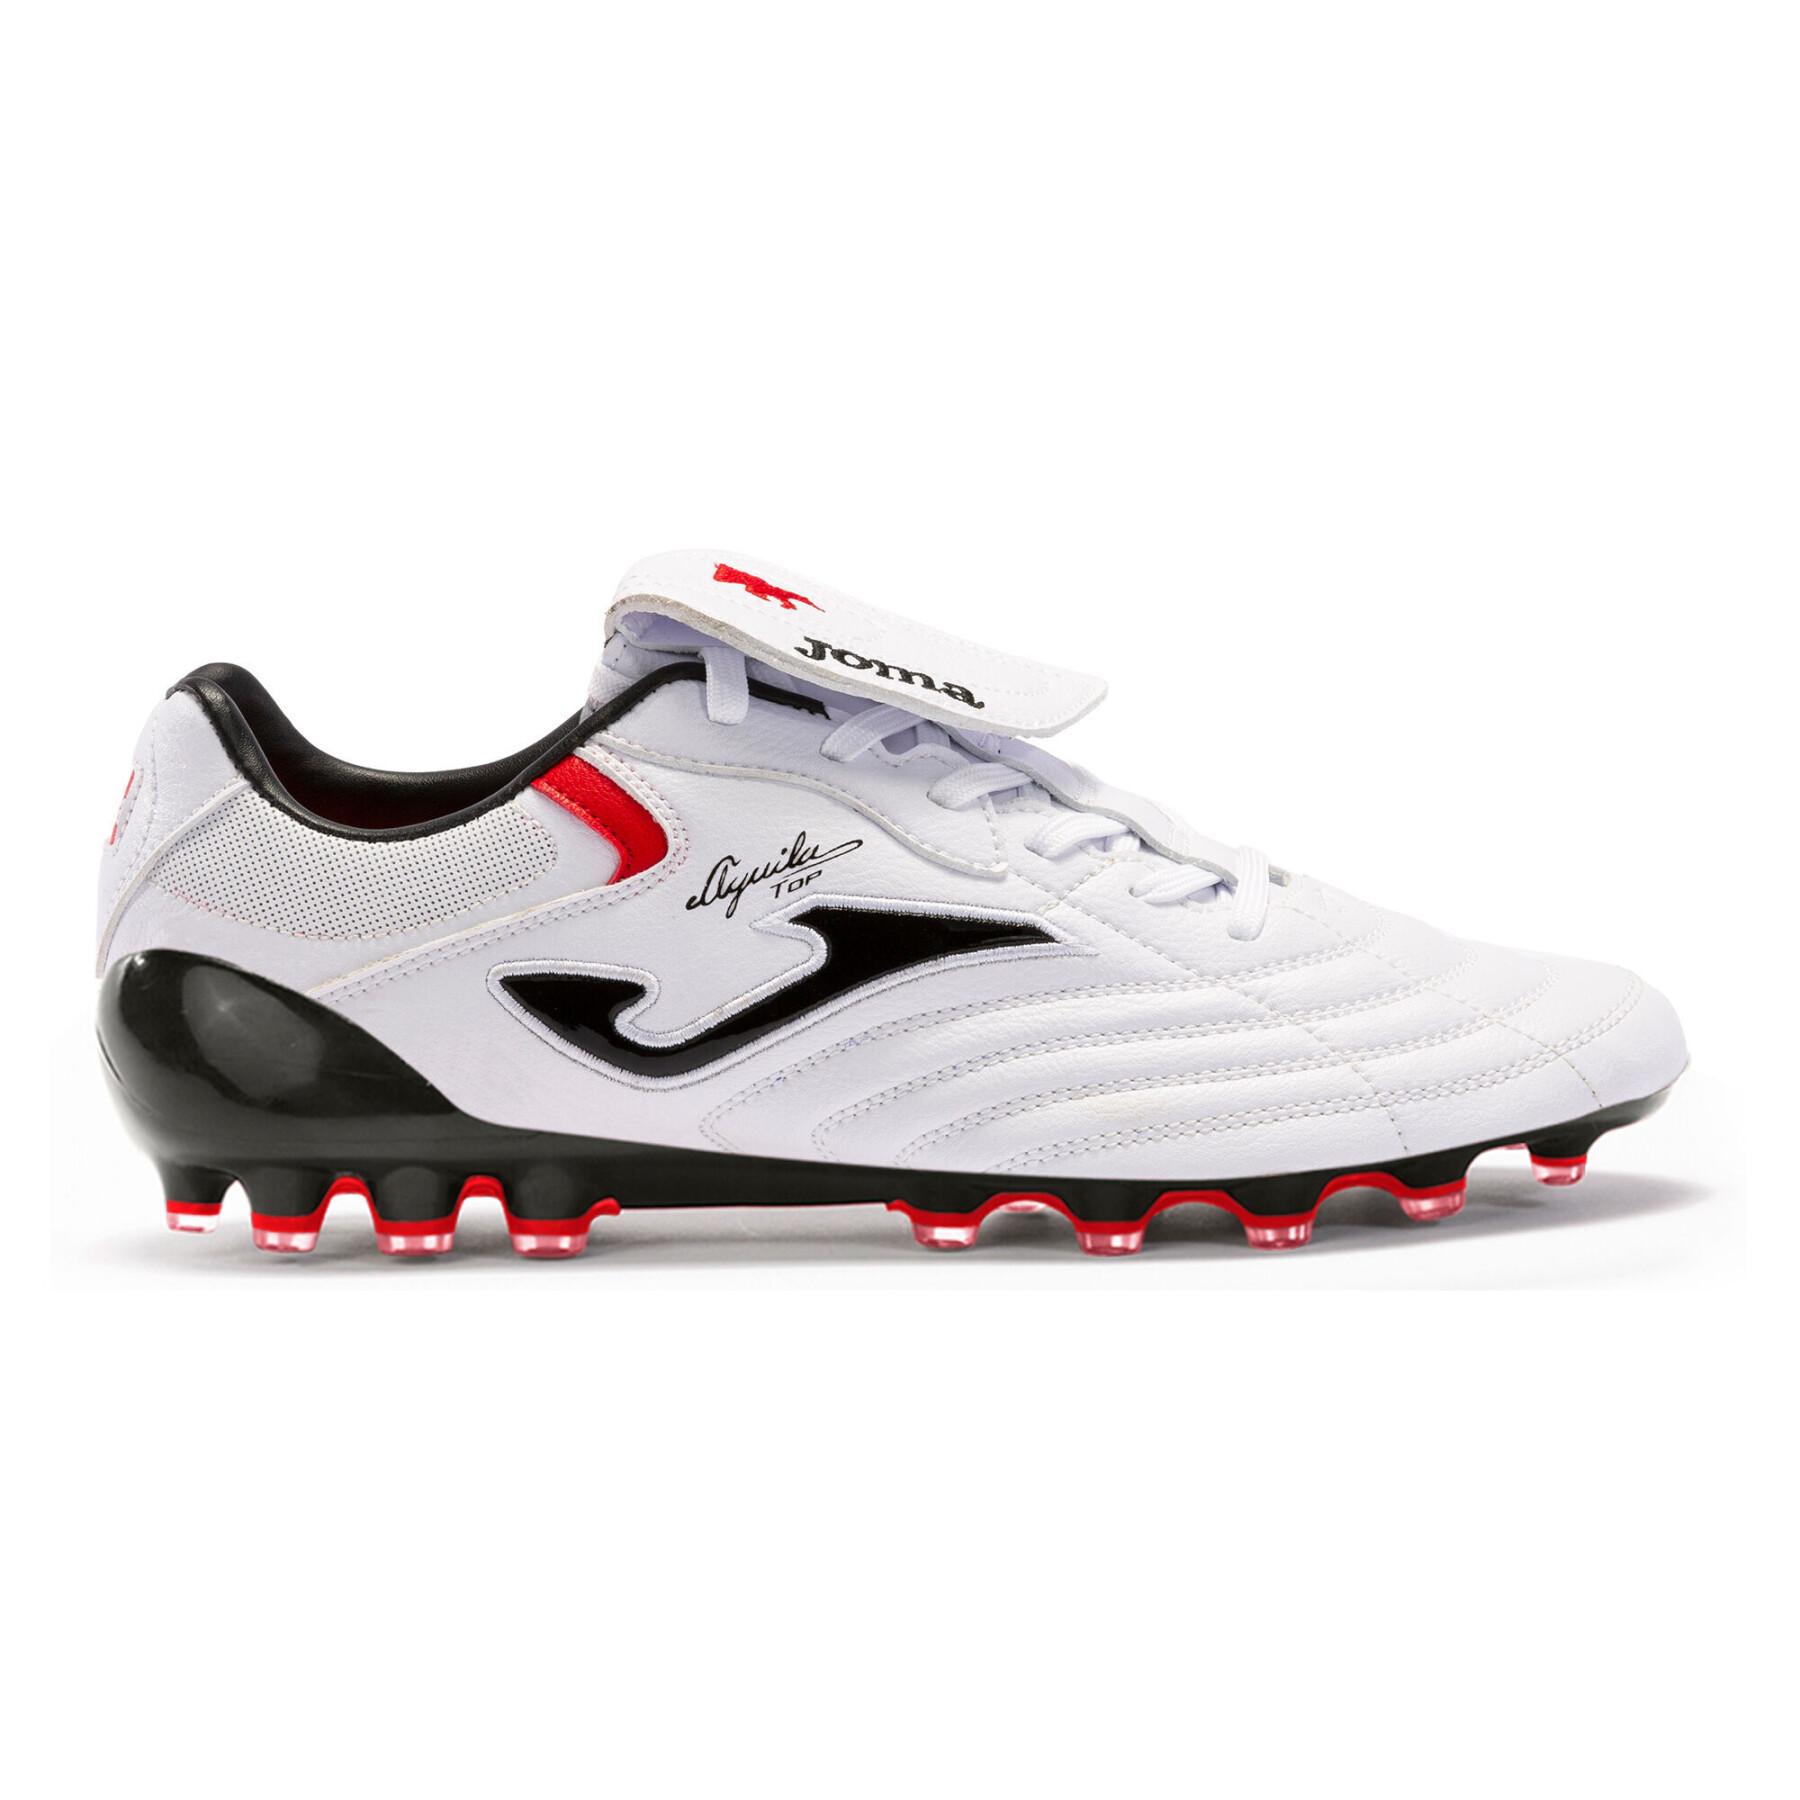 Voetbalschoenen Joma Aguila Cup 2302 AG